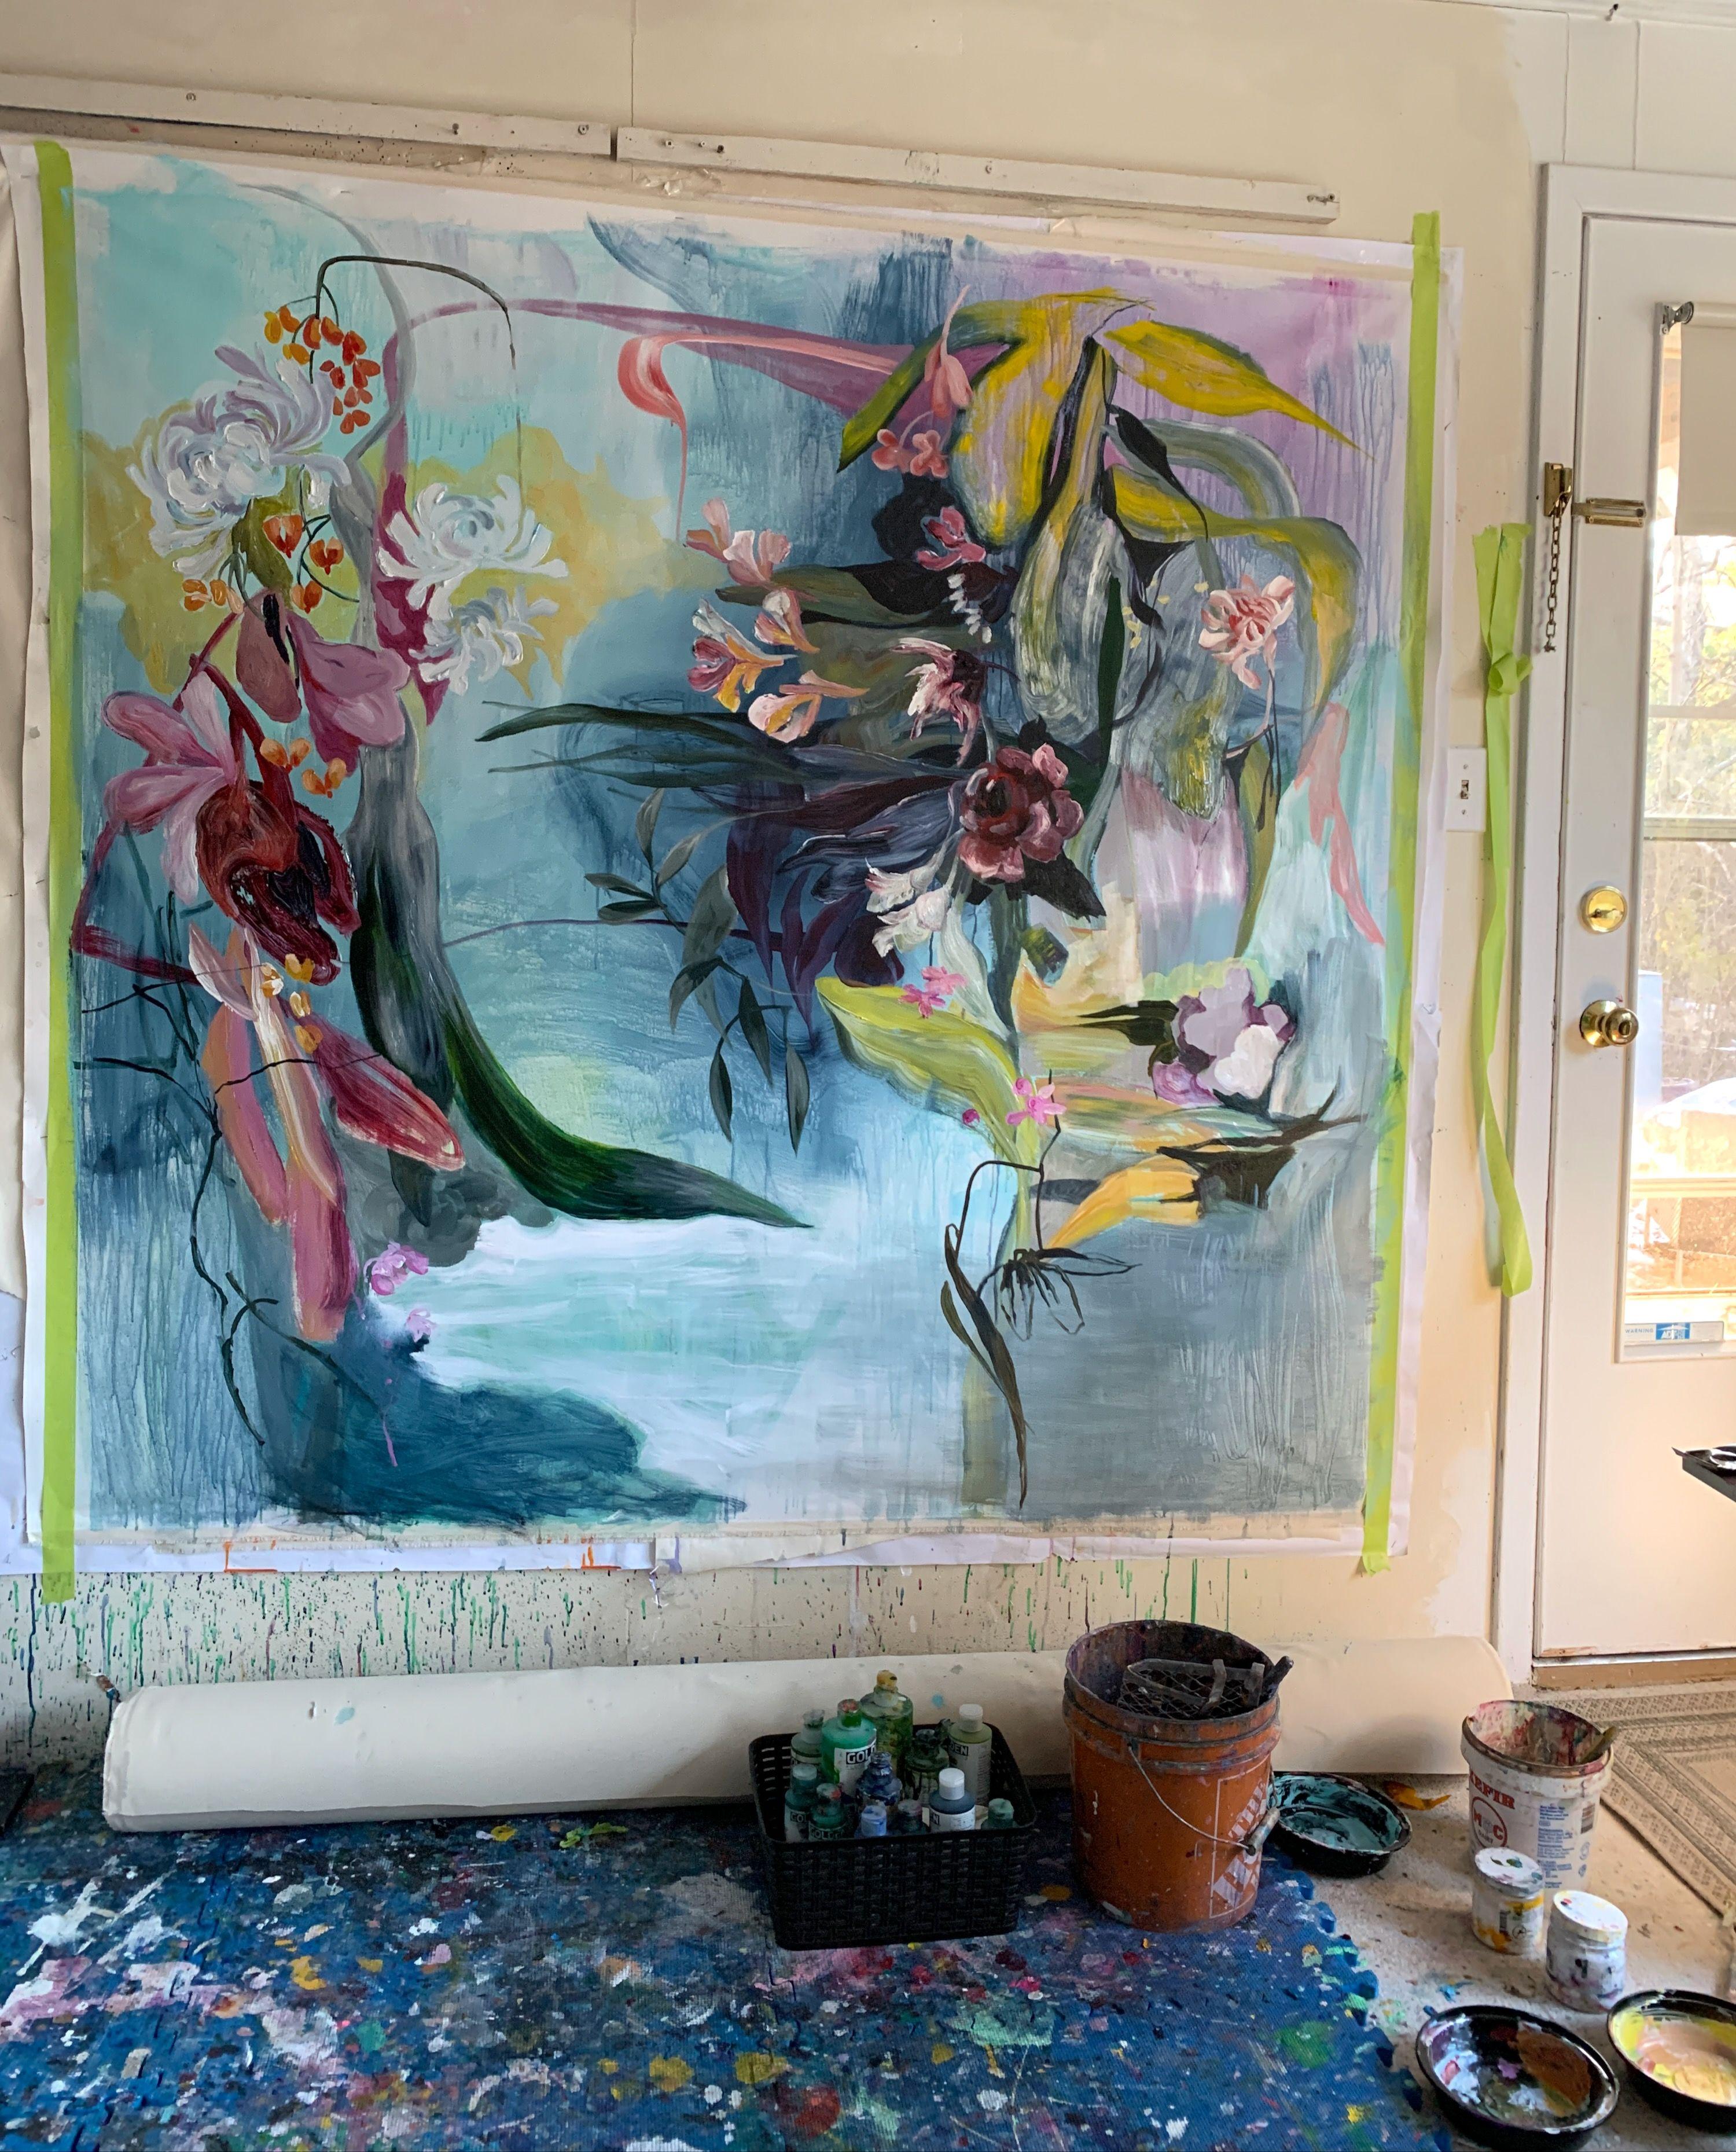 Oversized lyrical painting creates a sense of mystery floral garden. Painting is inspired by the book titled The secret garden. Artwork is shipped rolled in a protective tube and could be stretched at your local gallery. :: Painting :: Abstract